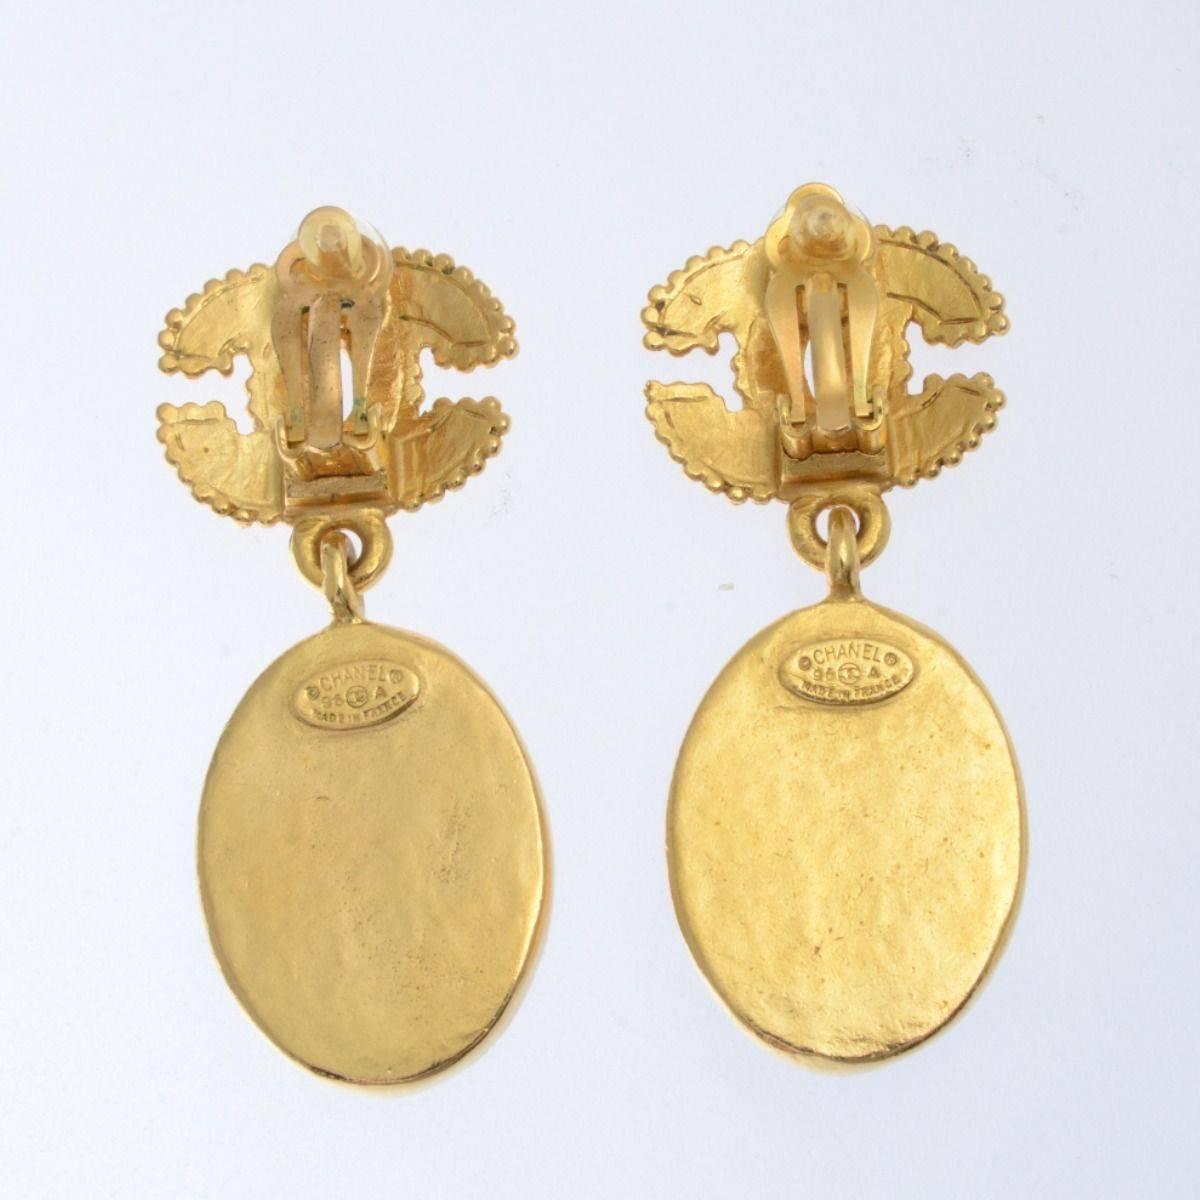 CURATOR'S NOTES

Gold tone
Stone
Clip on closure
Measures 2